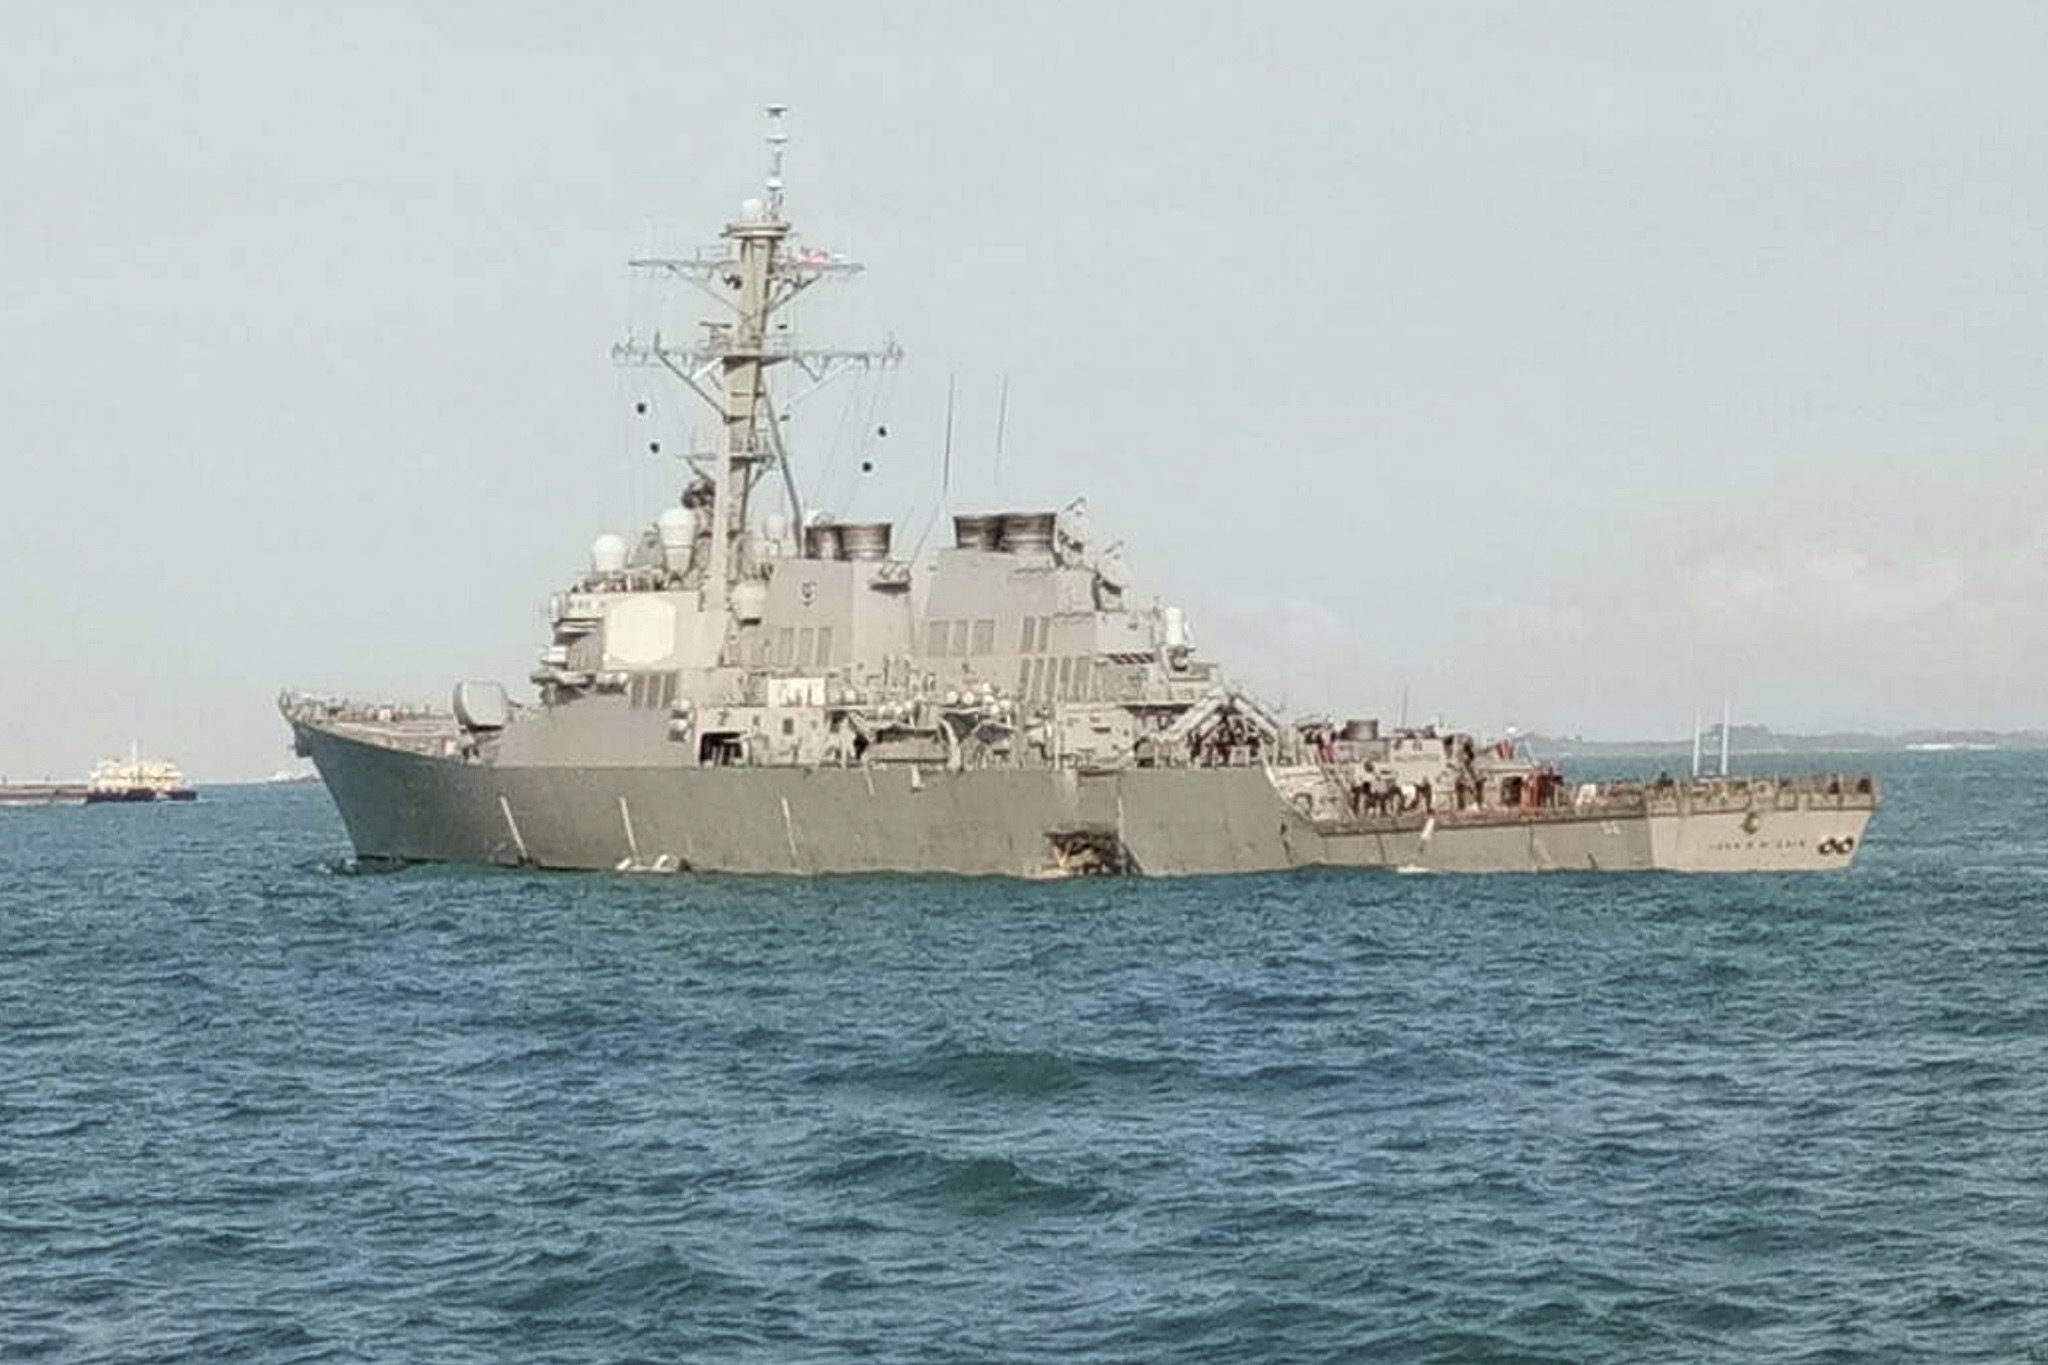 PHOTO: A handout photo made available by the Royal Malaysian Navy shows the U.S. guided-missile destroyer USS John S McCain after a collision off the coast of Johor, Malaysia, Aug. 21, 2017.